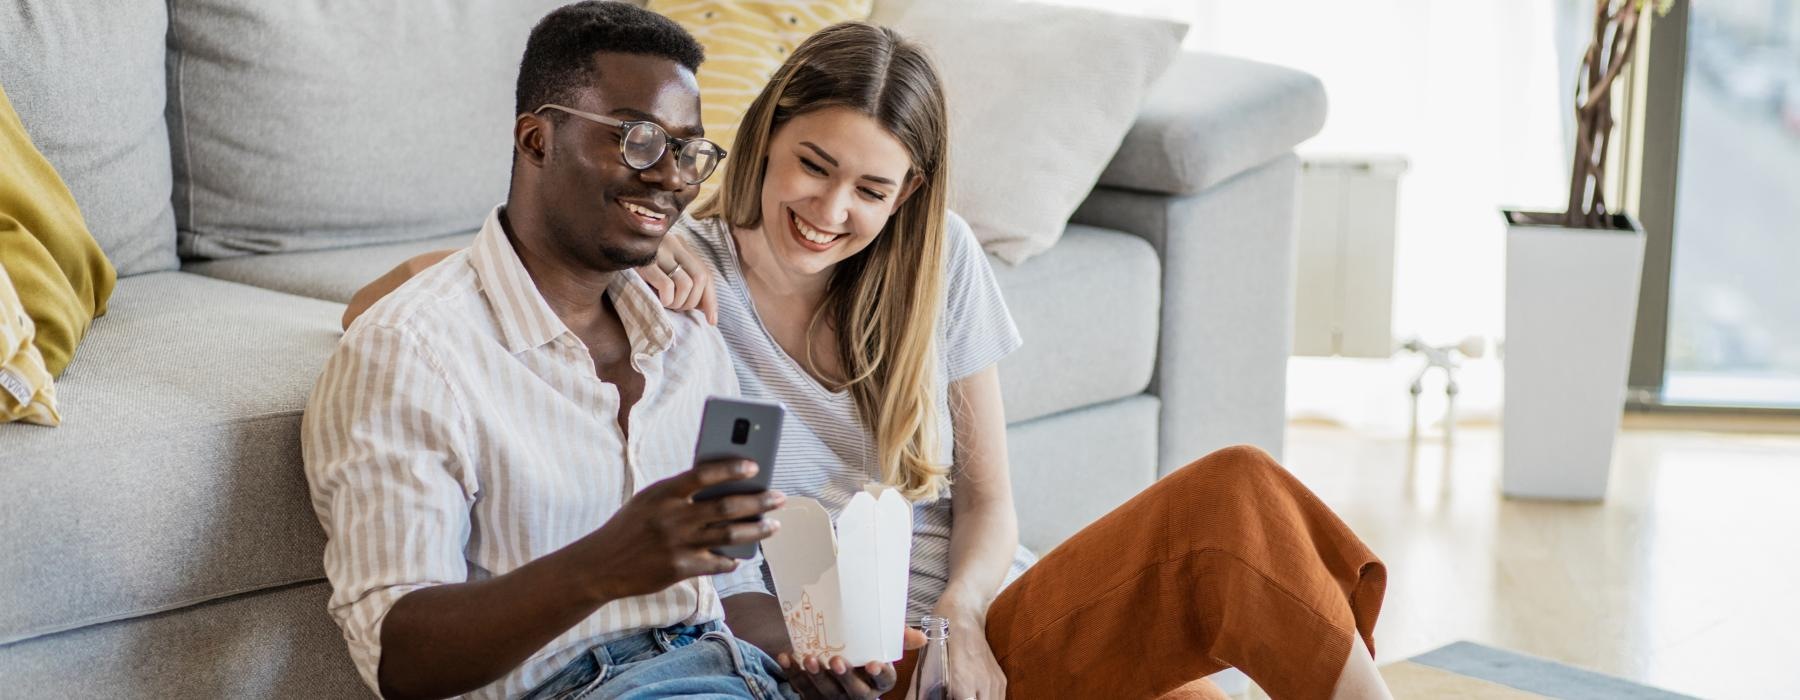 a man and a woman sitting on a couch and looking at a cell phone